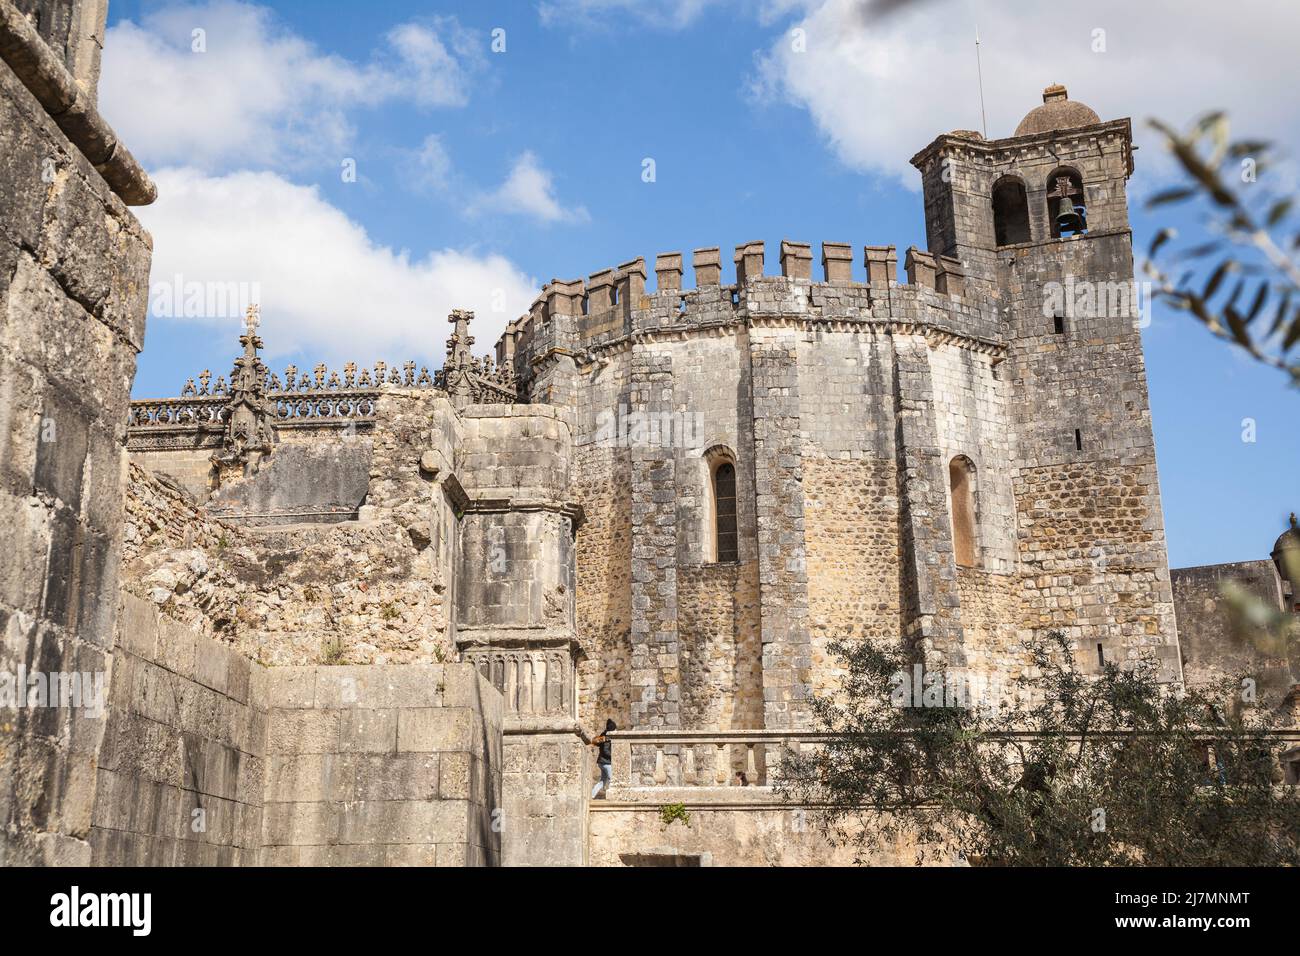 view of the Monastery castle in Tomar Portugal Stock Photo